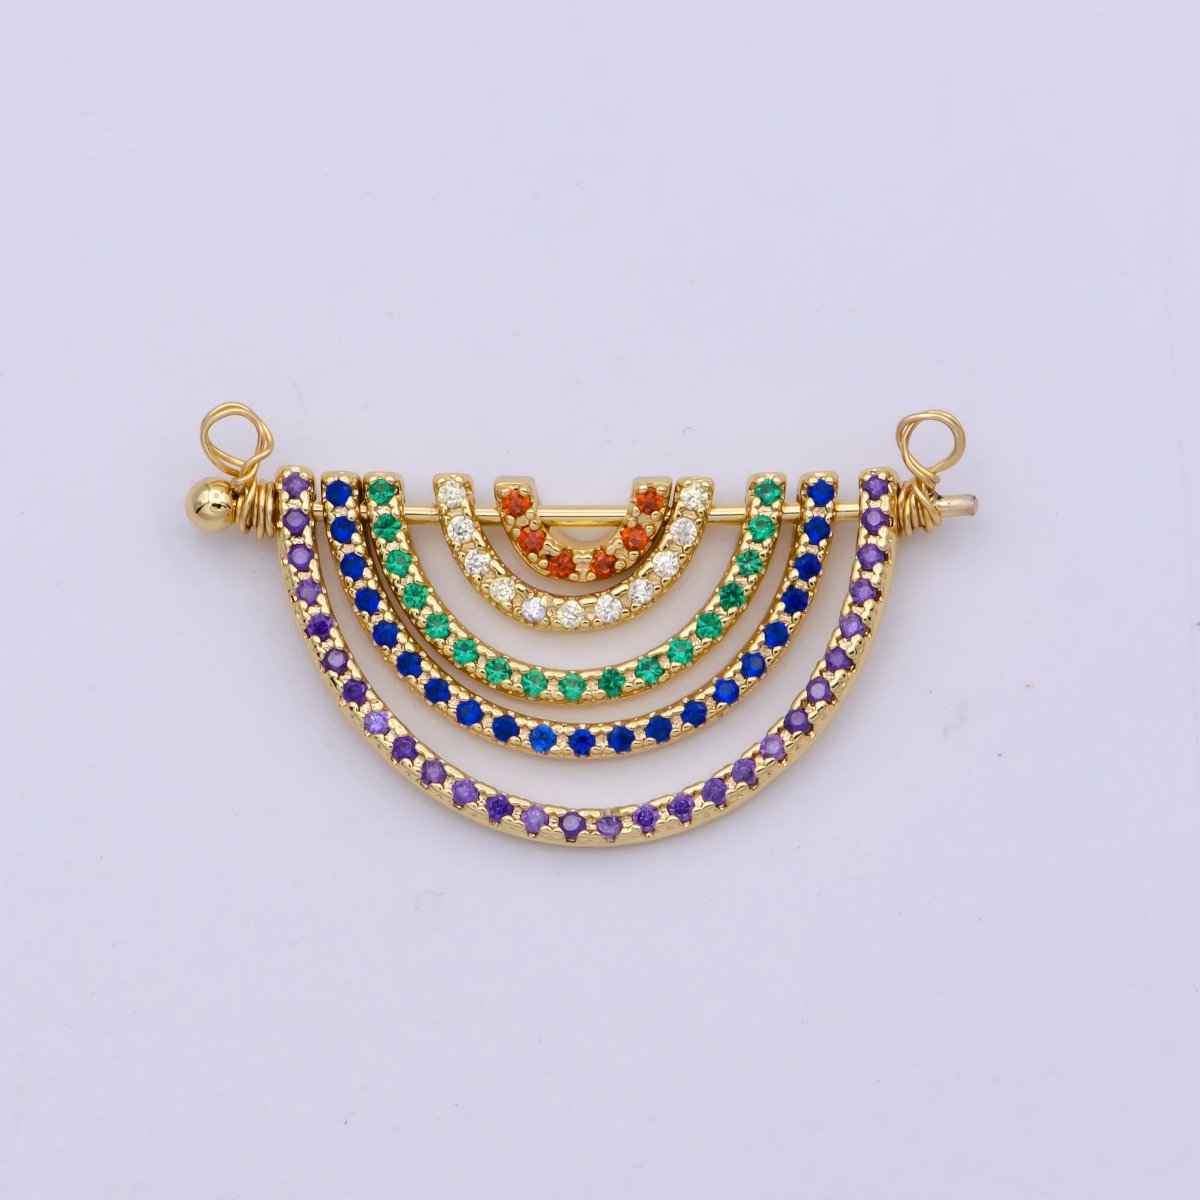 Gold Rainbow Shape Charm for Necklace Pendant Double Bail Dual Loop Charm for Jewelry Making Supply, White Gold Rainbow CONNECTOR F-319 F-575 N-065 N-066 - DLUXCA